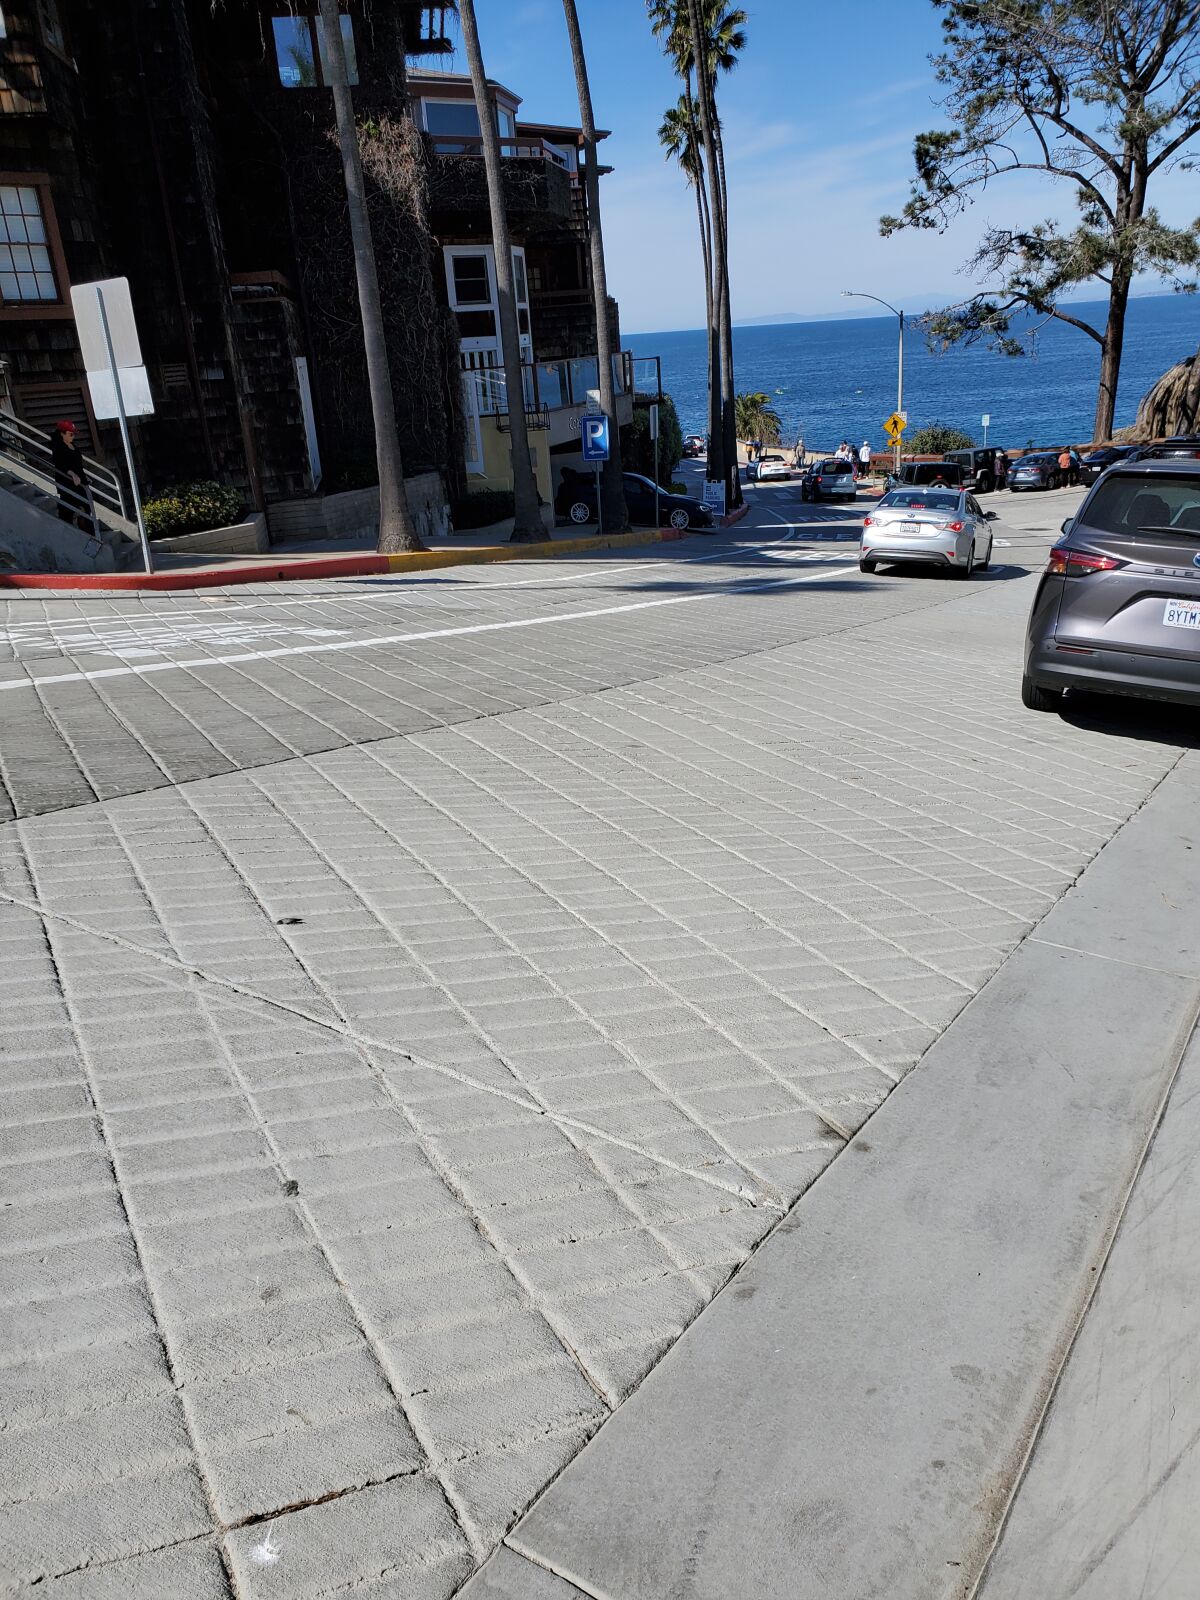 After a recent storm drain repair project on Cave Street in La Jolla, the road was resurfaced and restored.